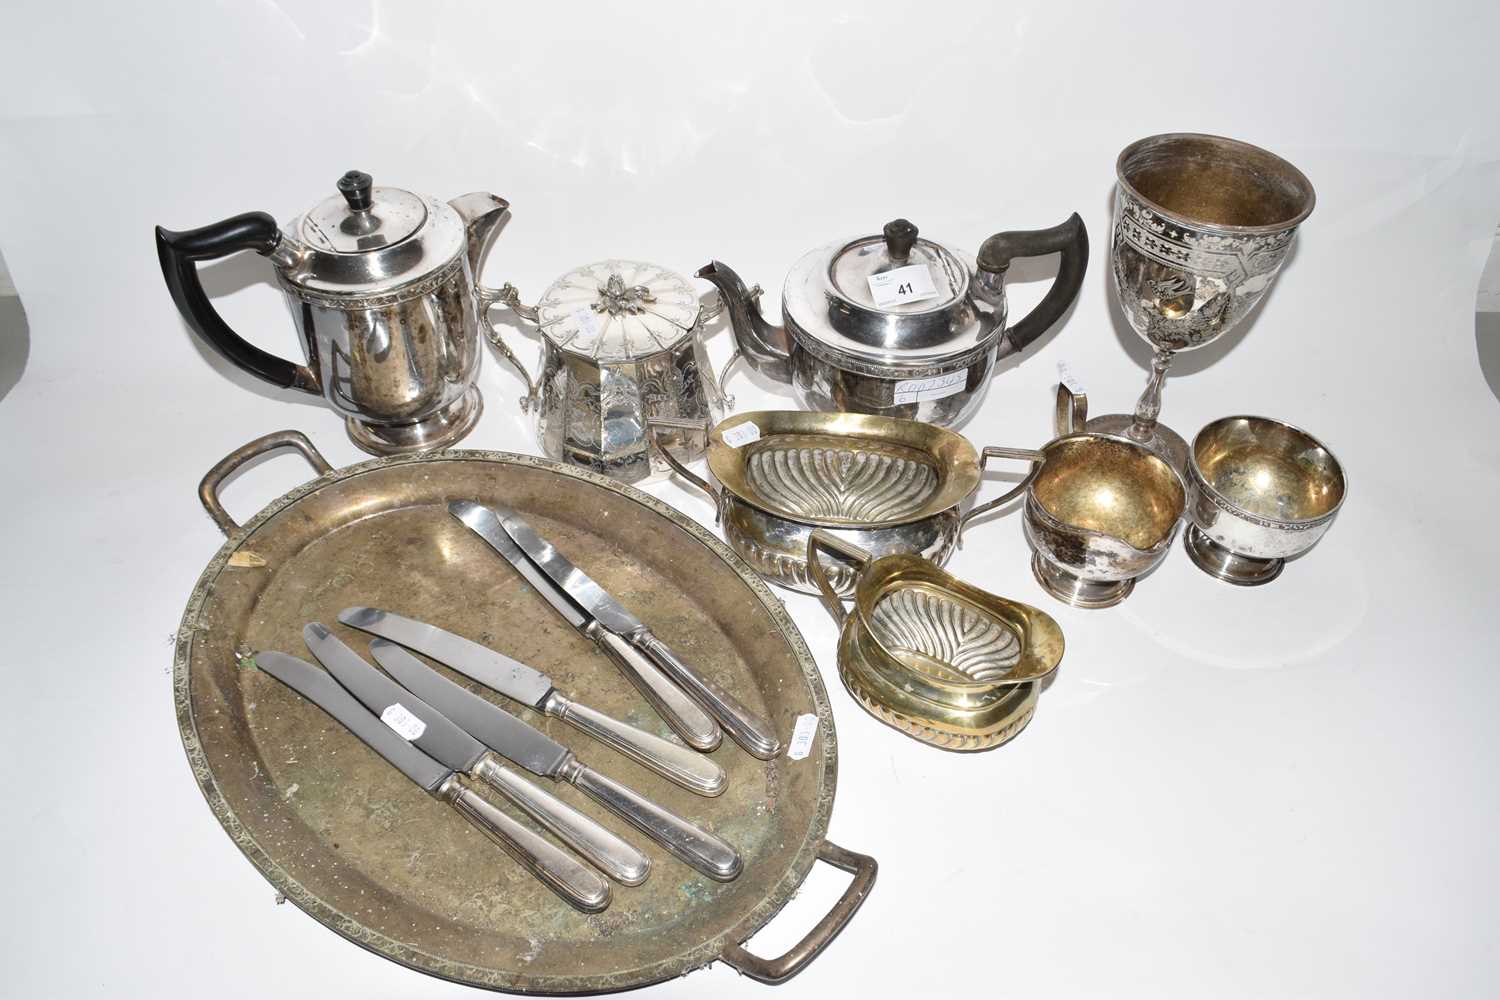 Mixed Lot: Various assorted silver plated tea wares, serving trays, knives etc - Image 2 of 2